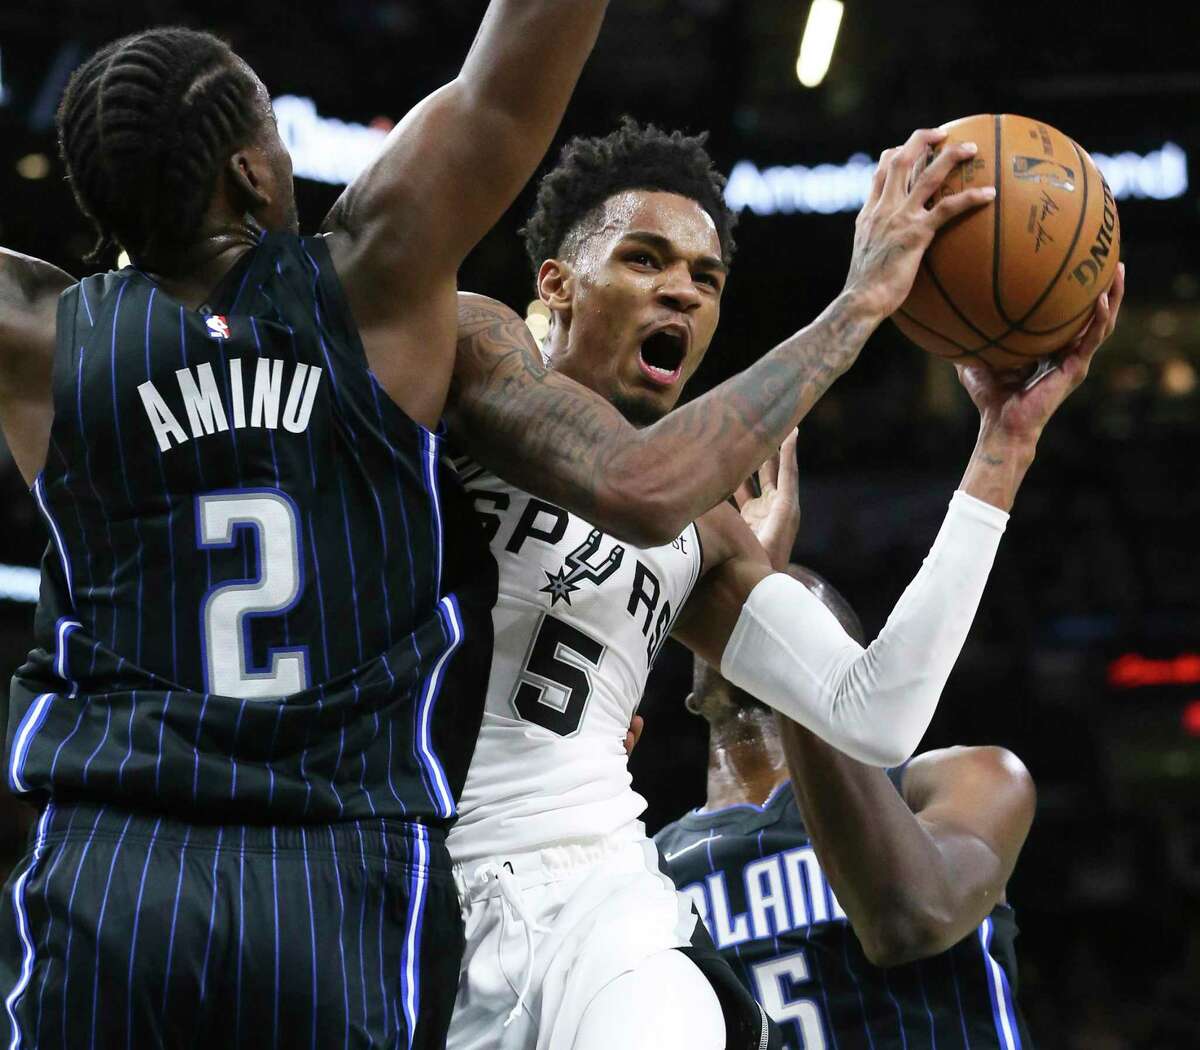 Dejounte Murray became the first Spur to sign an extension since Tiago Splitter in 2013. The point guard, with just a total of 135 games played, missed the 2018-19 season with a knee injury.